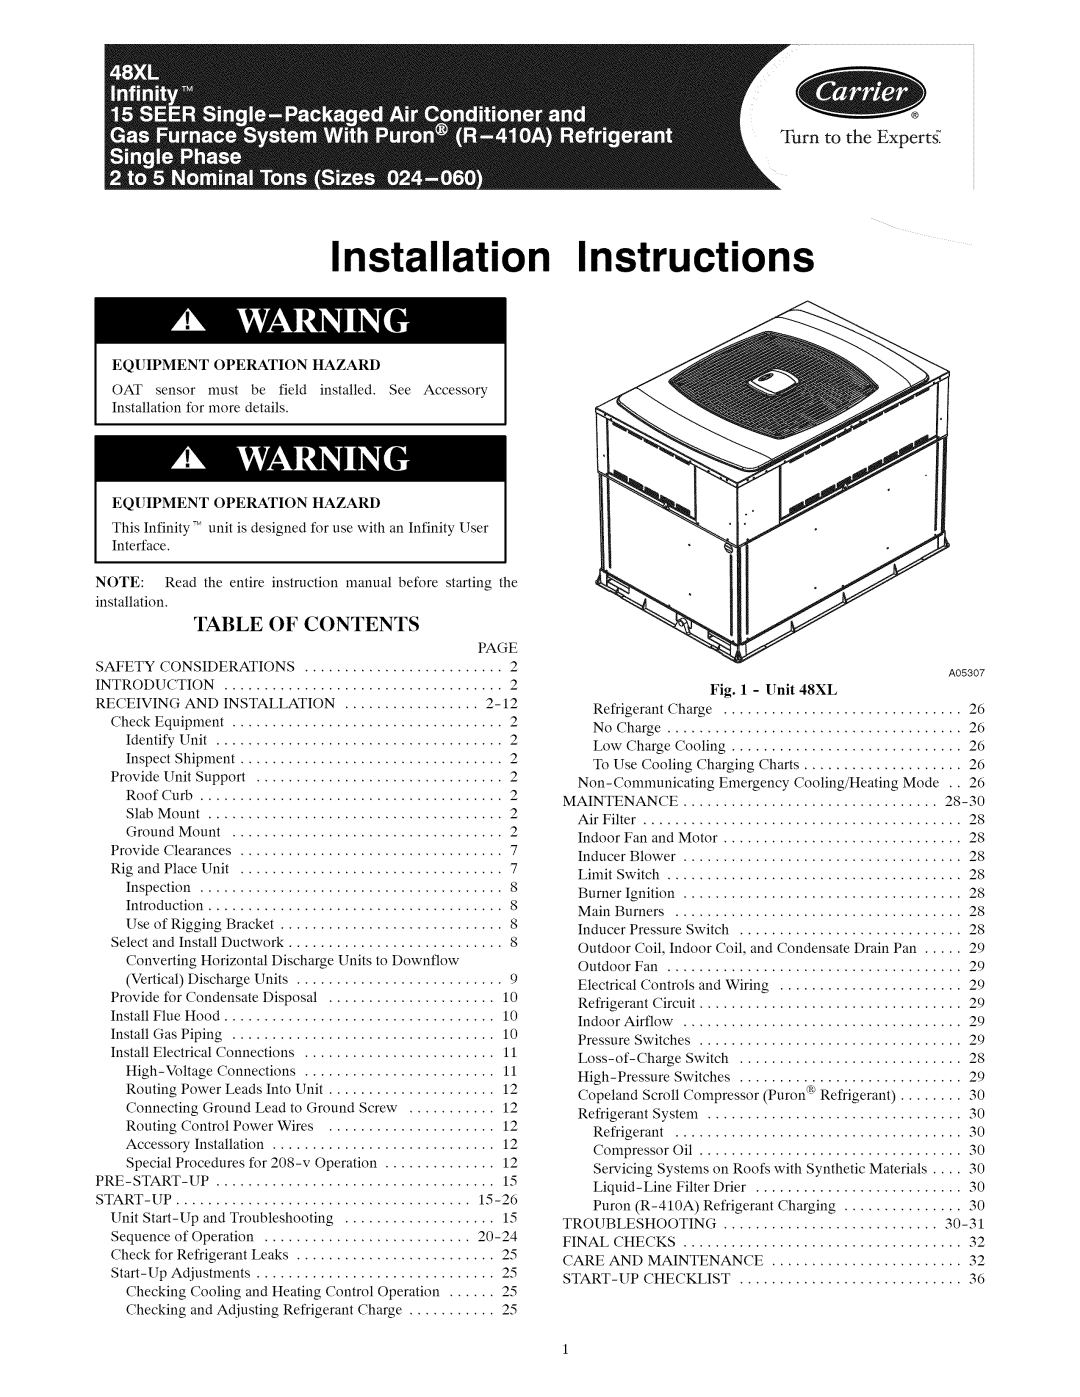 Carrier 48XL installation instructions Of Contents, Turn to the Expertg, Limit Switch, Liquid-Line, Installation 